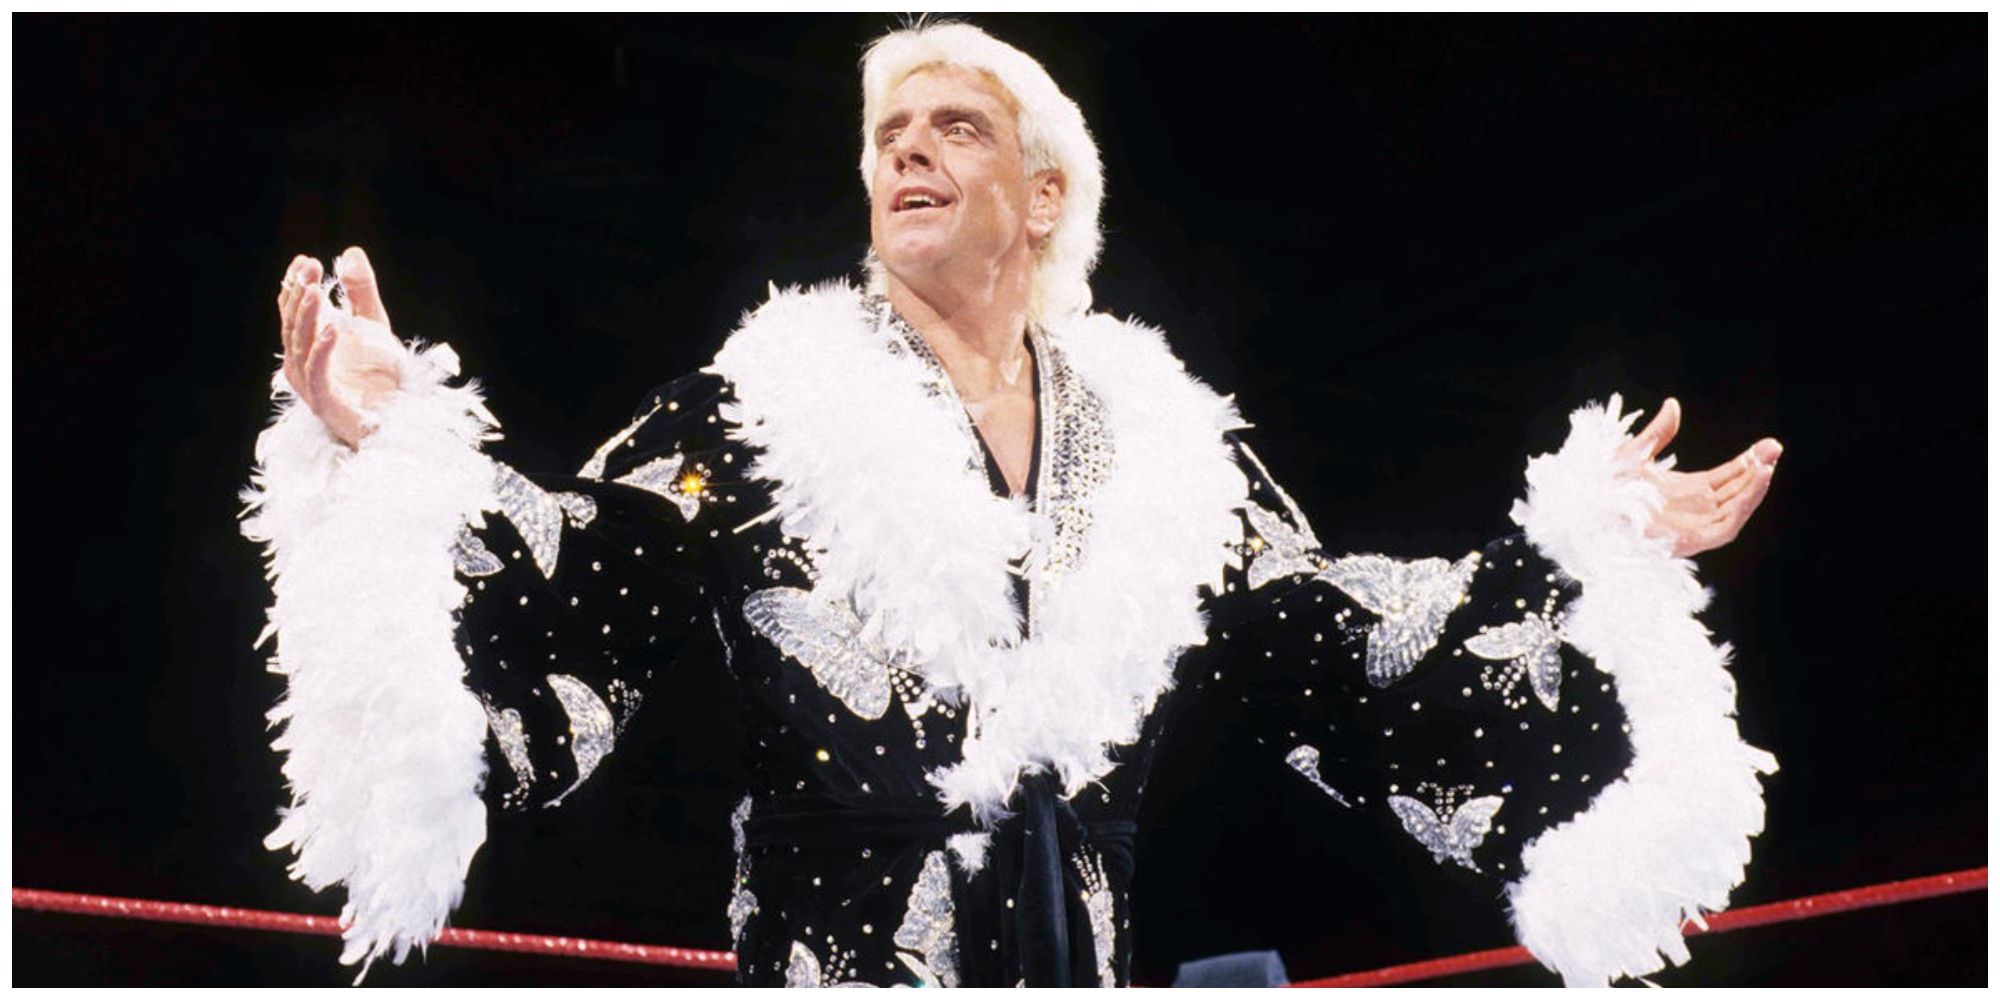 Ric Flair in a WWE ring wearing a black robe with white feathers holding his arms out